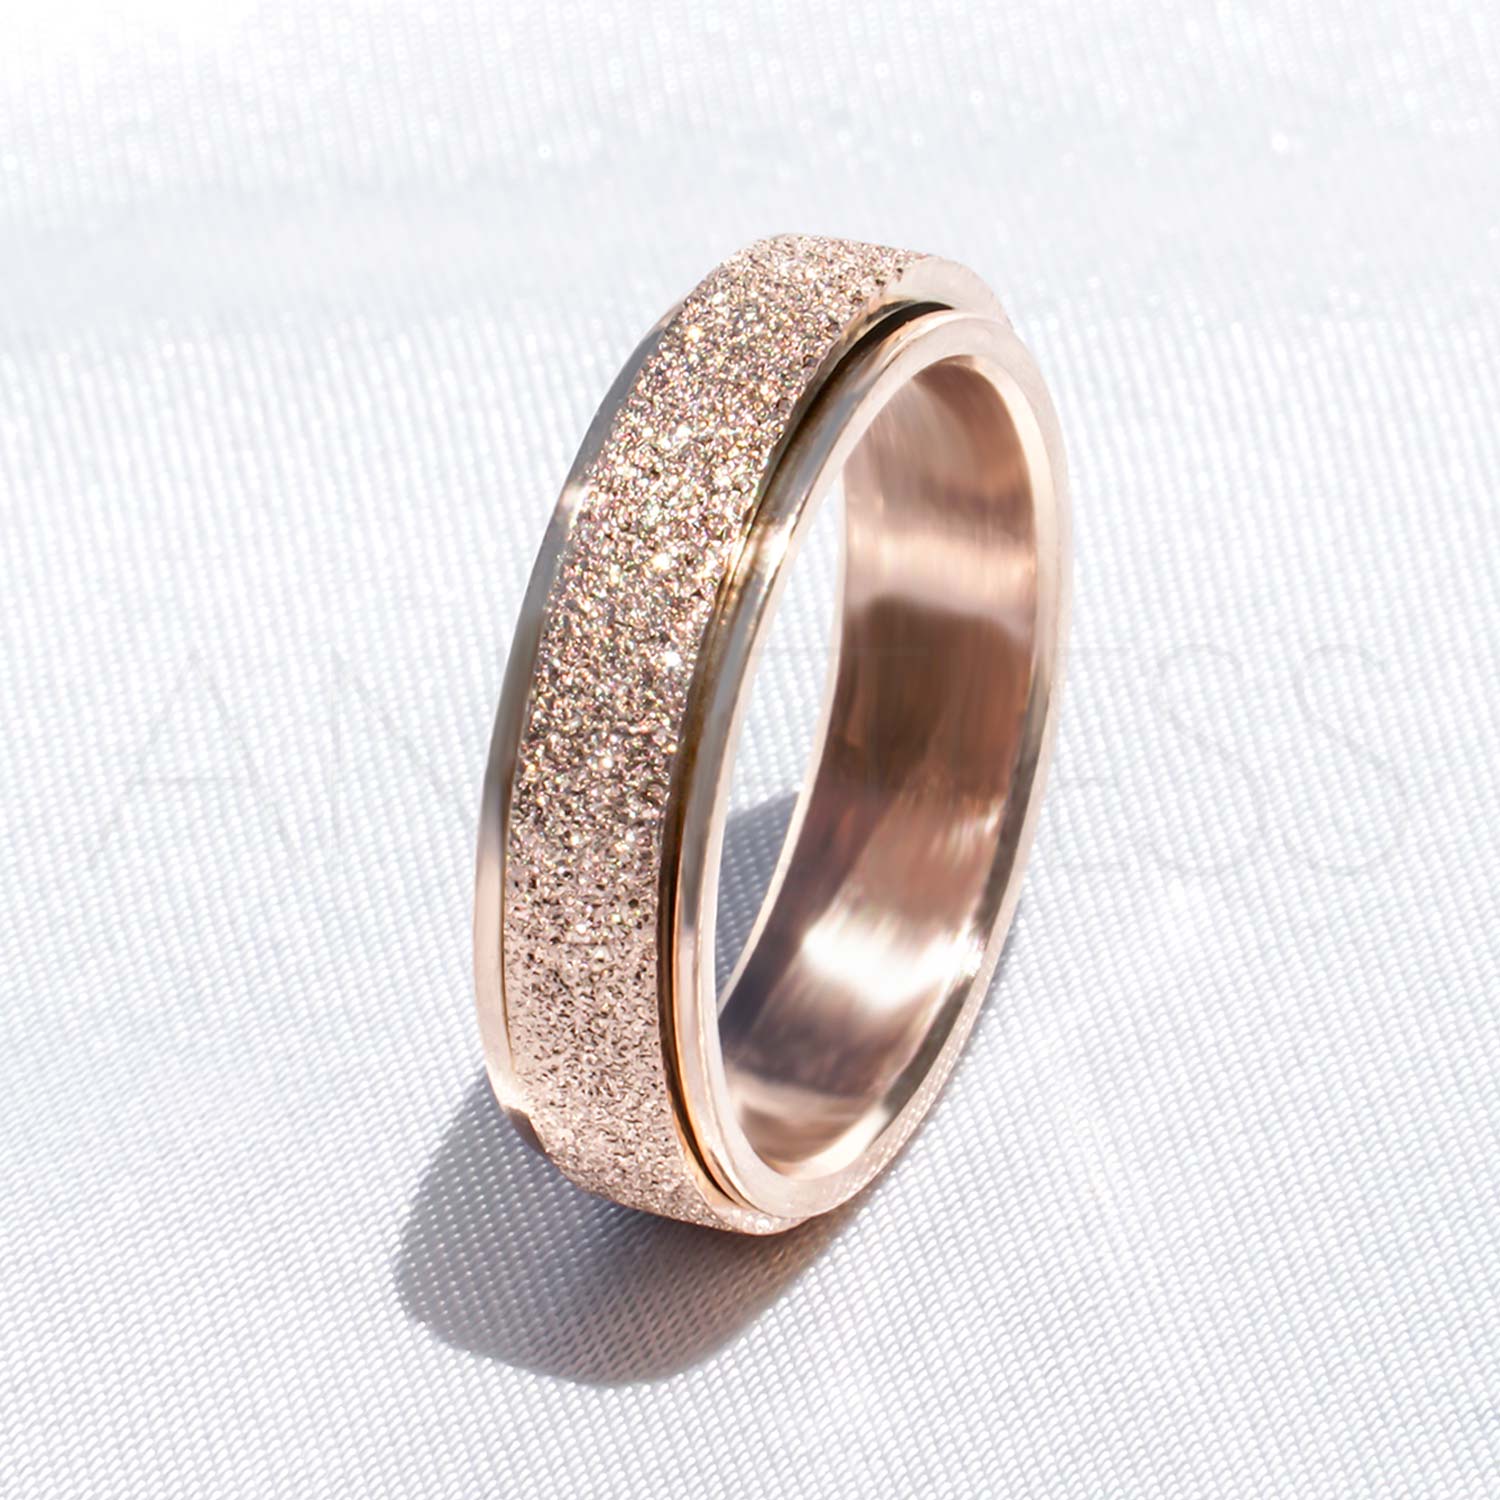 Sparkly Rose gold Anxiety Ring on White Background